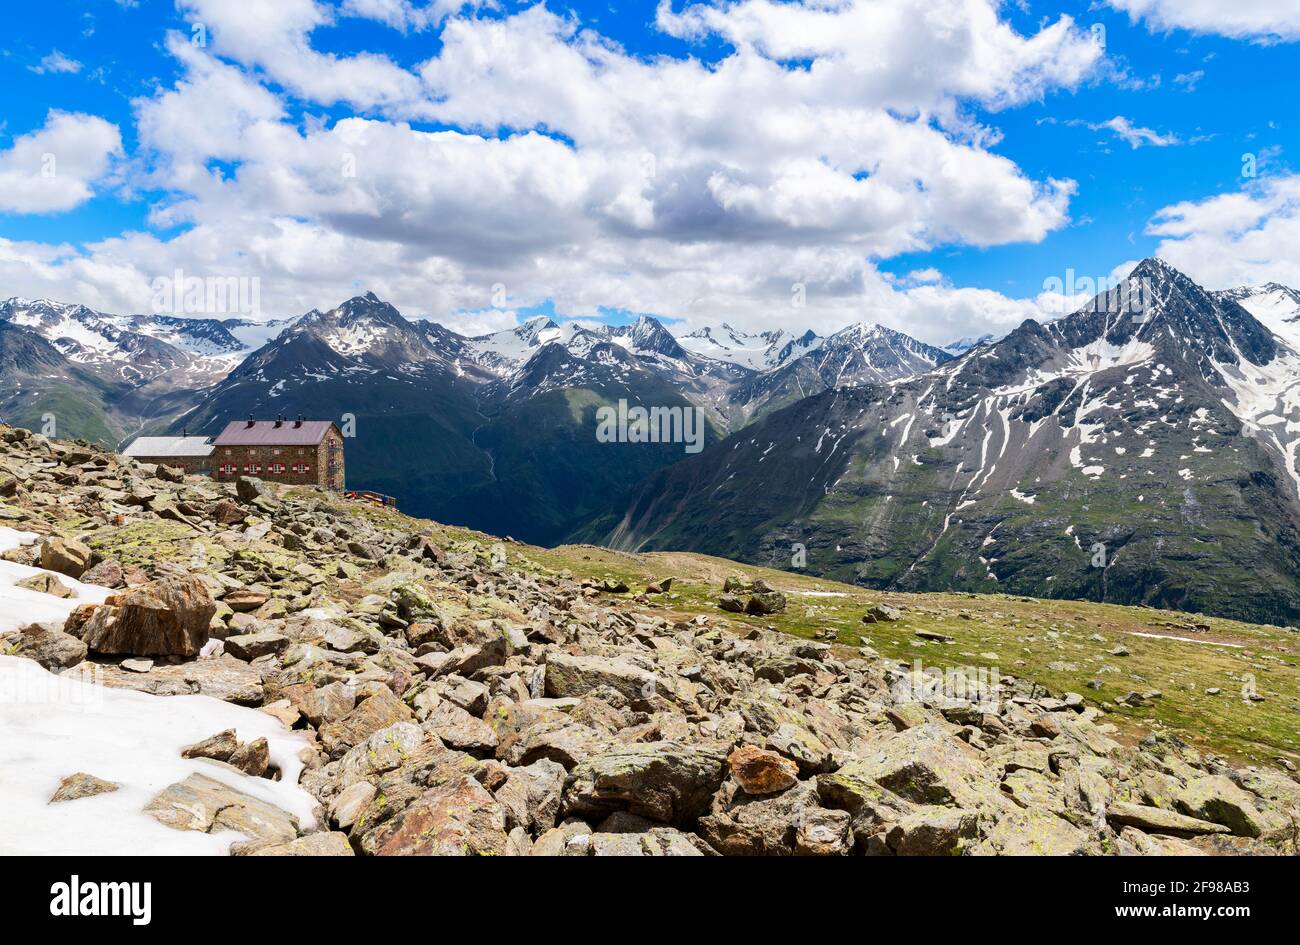 Alpine mountain landscape with snow-capped peaks and mountain hut on a sunny early summer day. Ötztal Alps, Tyrol, Austria Stock Photo